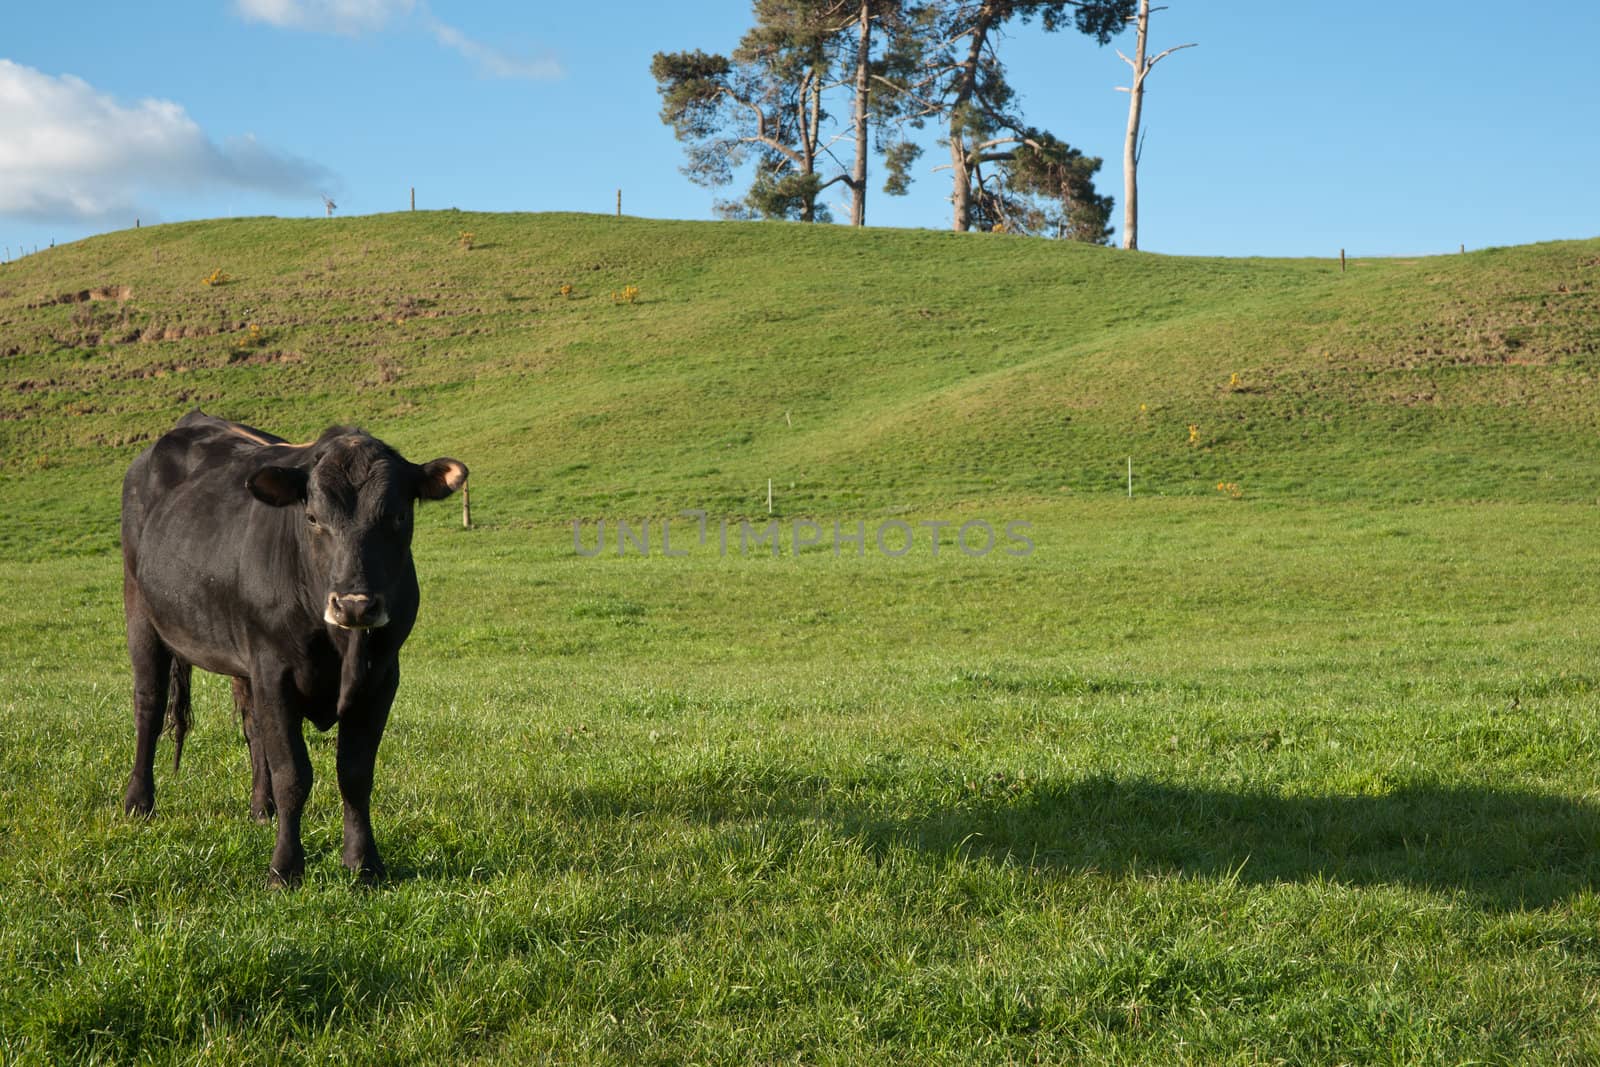 Black cow. by brians101